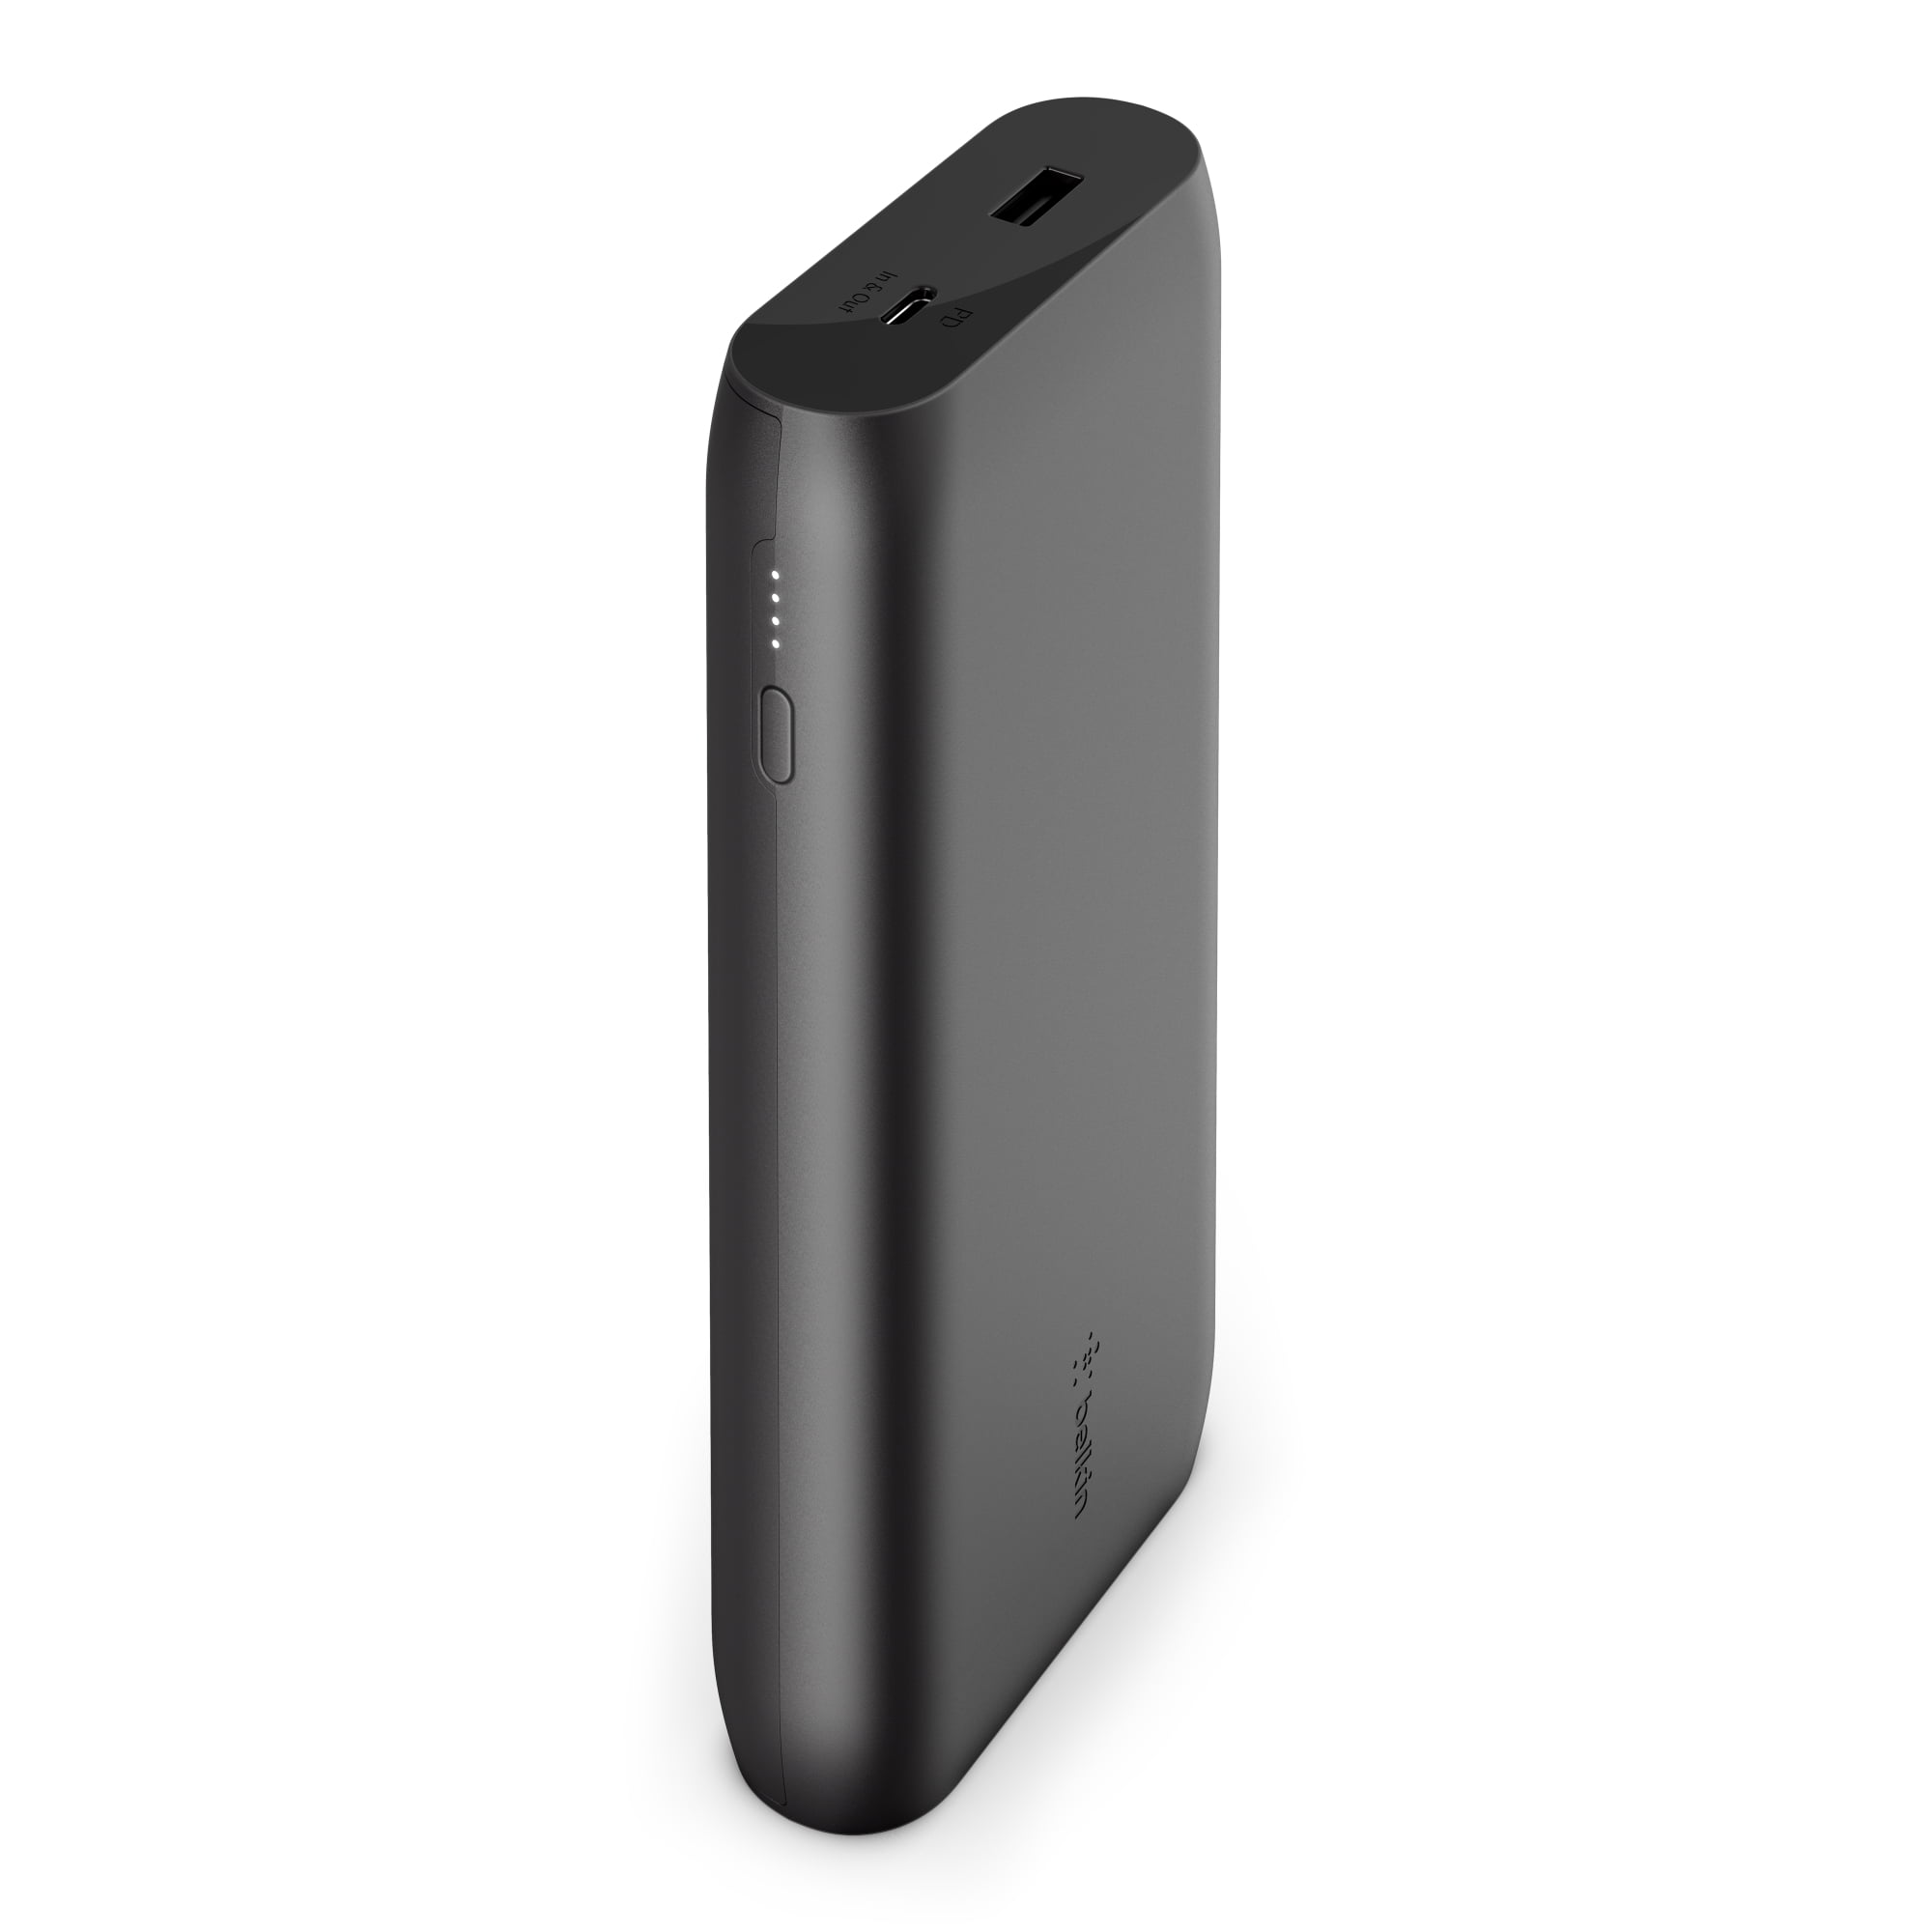 Belkin Portable Power Bank Charger ( Battery Pack w/Dual USB Ports,  20000mAh )